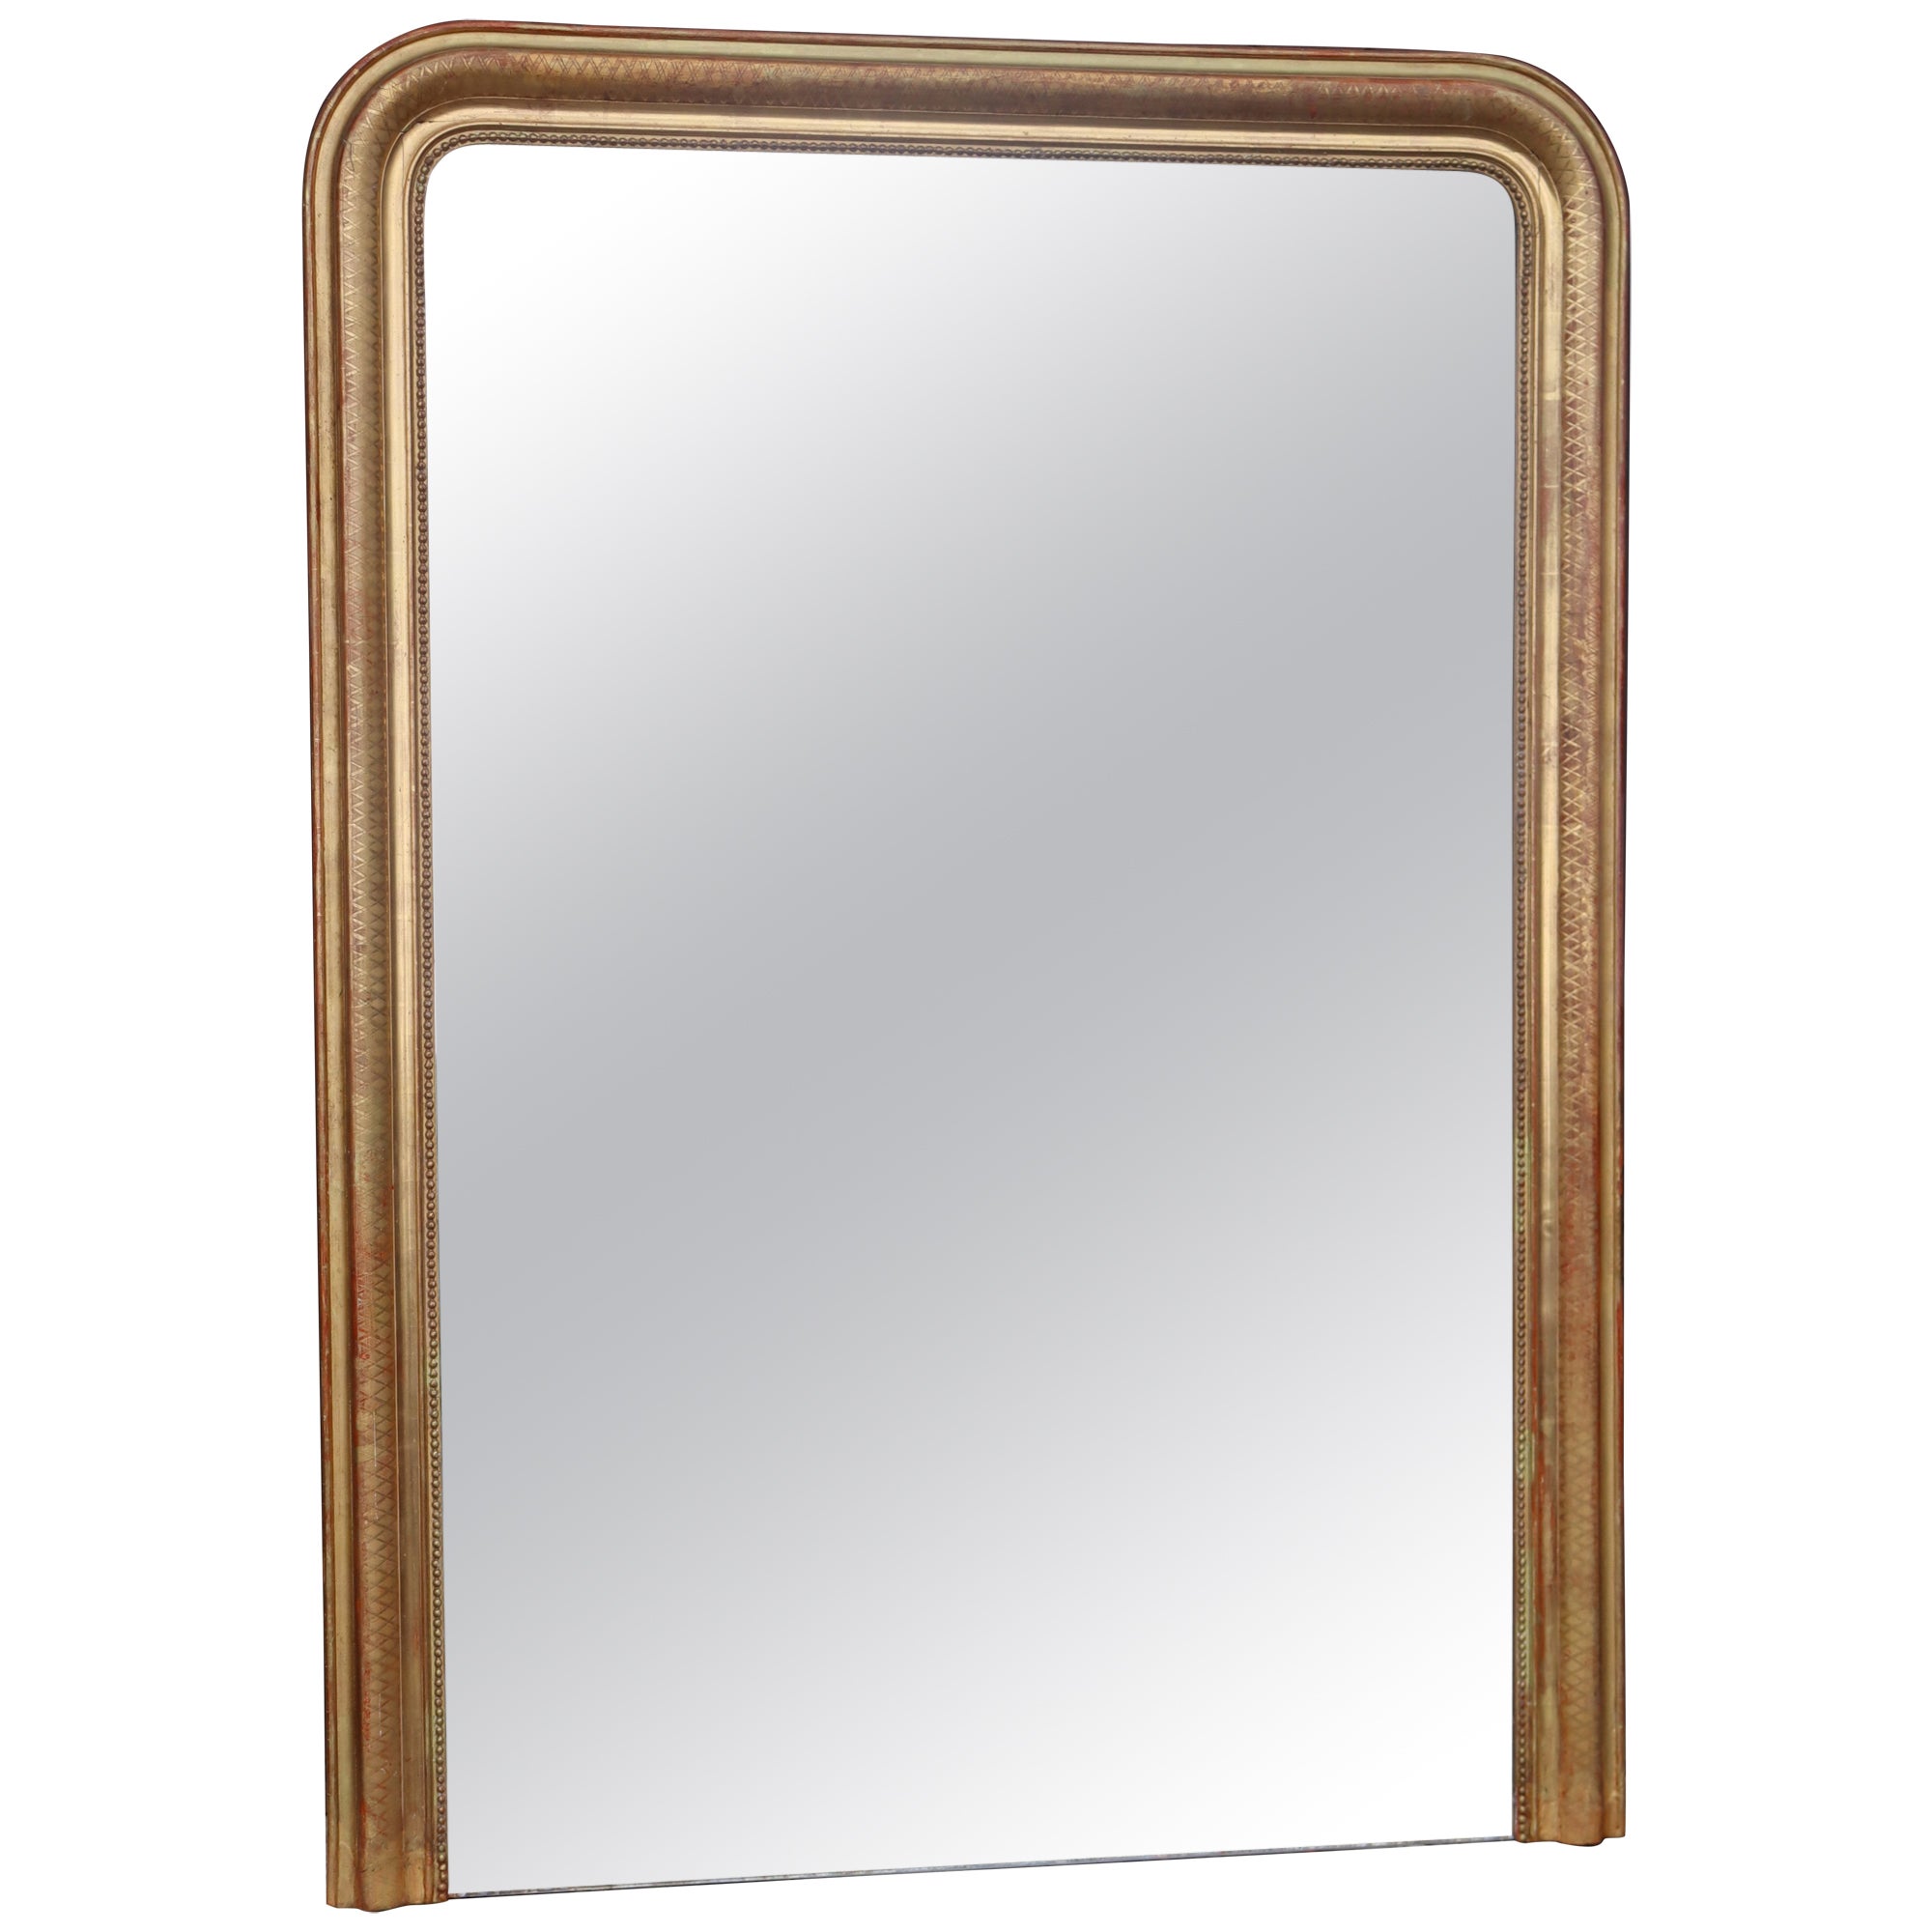 Large Louis Philippe Fireplace Mirror In Golden Wood 175cm High